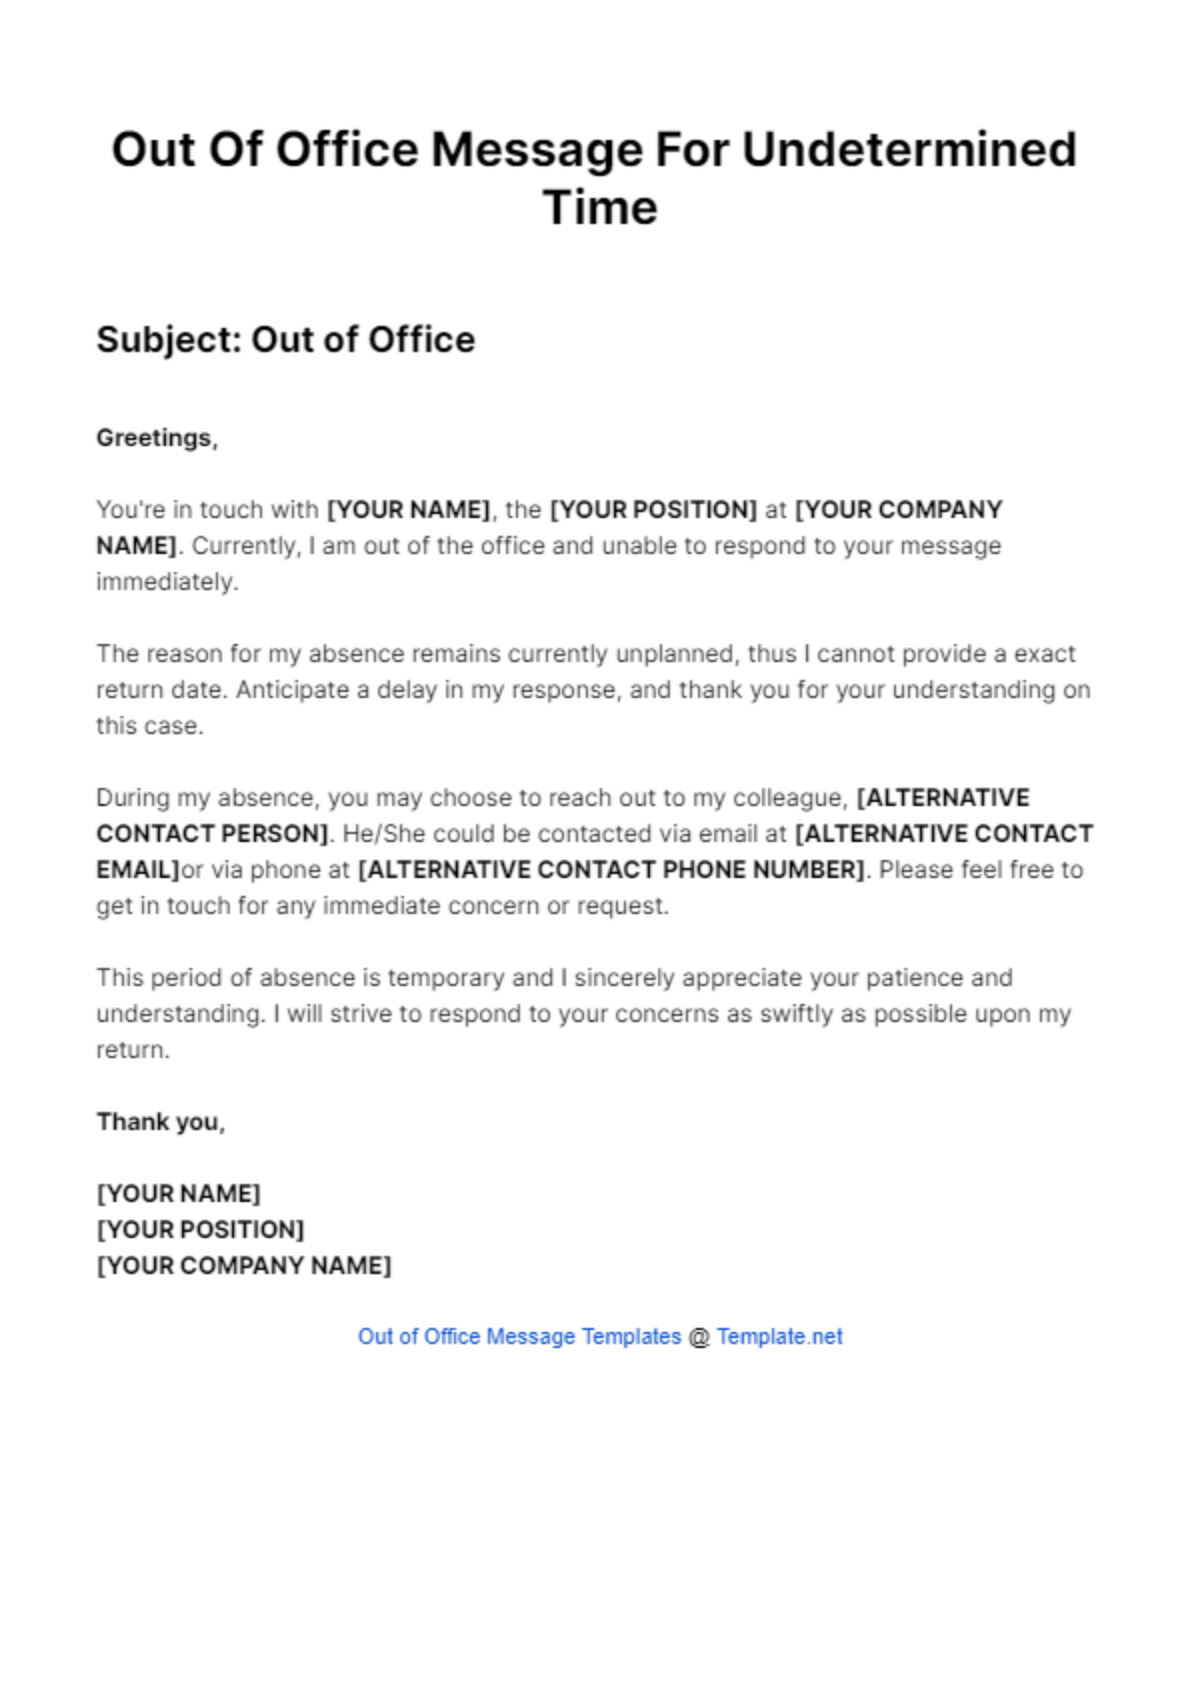 Free Out Of Office Message For Undetermined Time Template